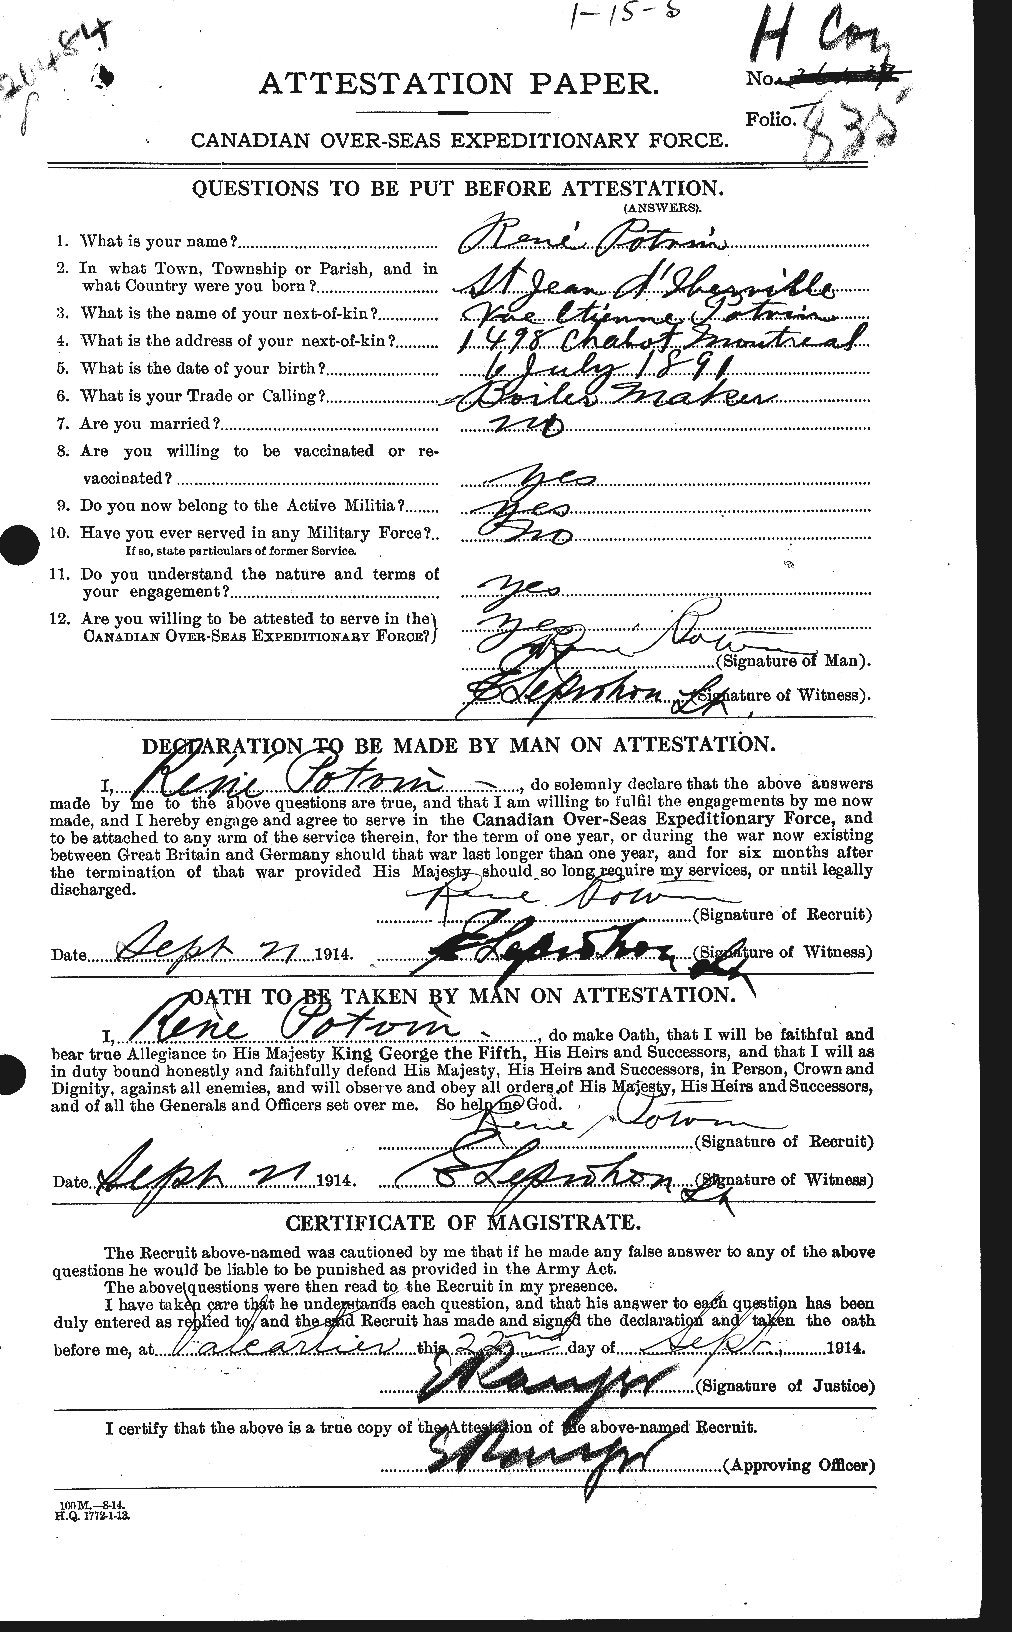 Personnel Records of the First World War - CEF 584660a